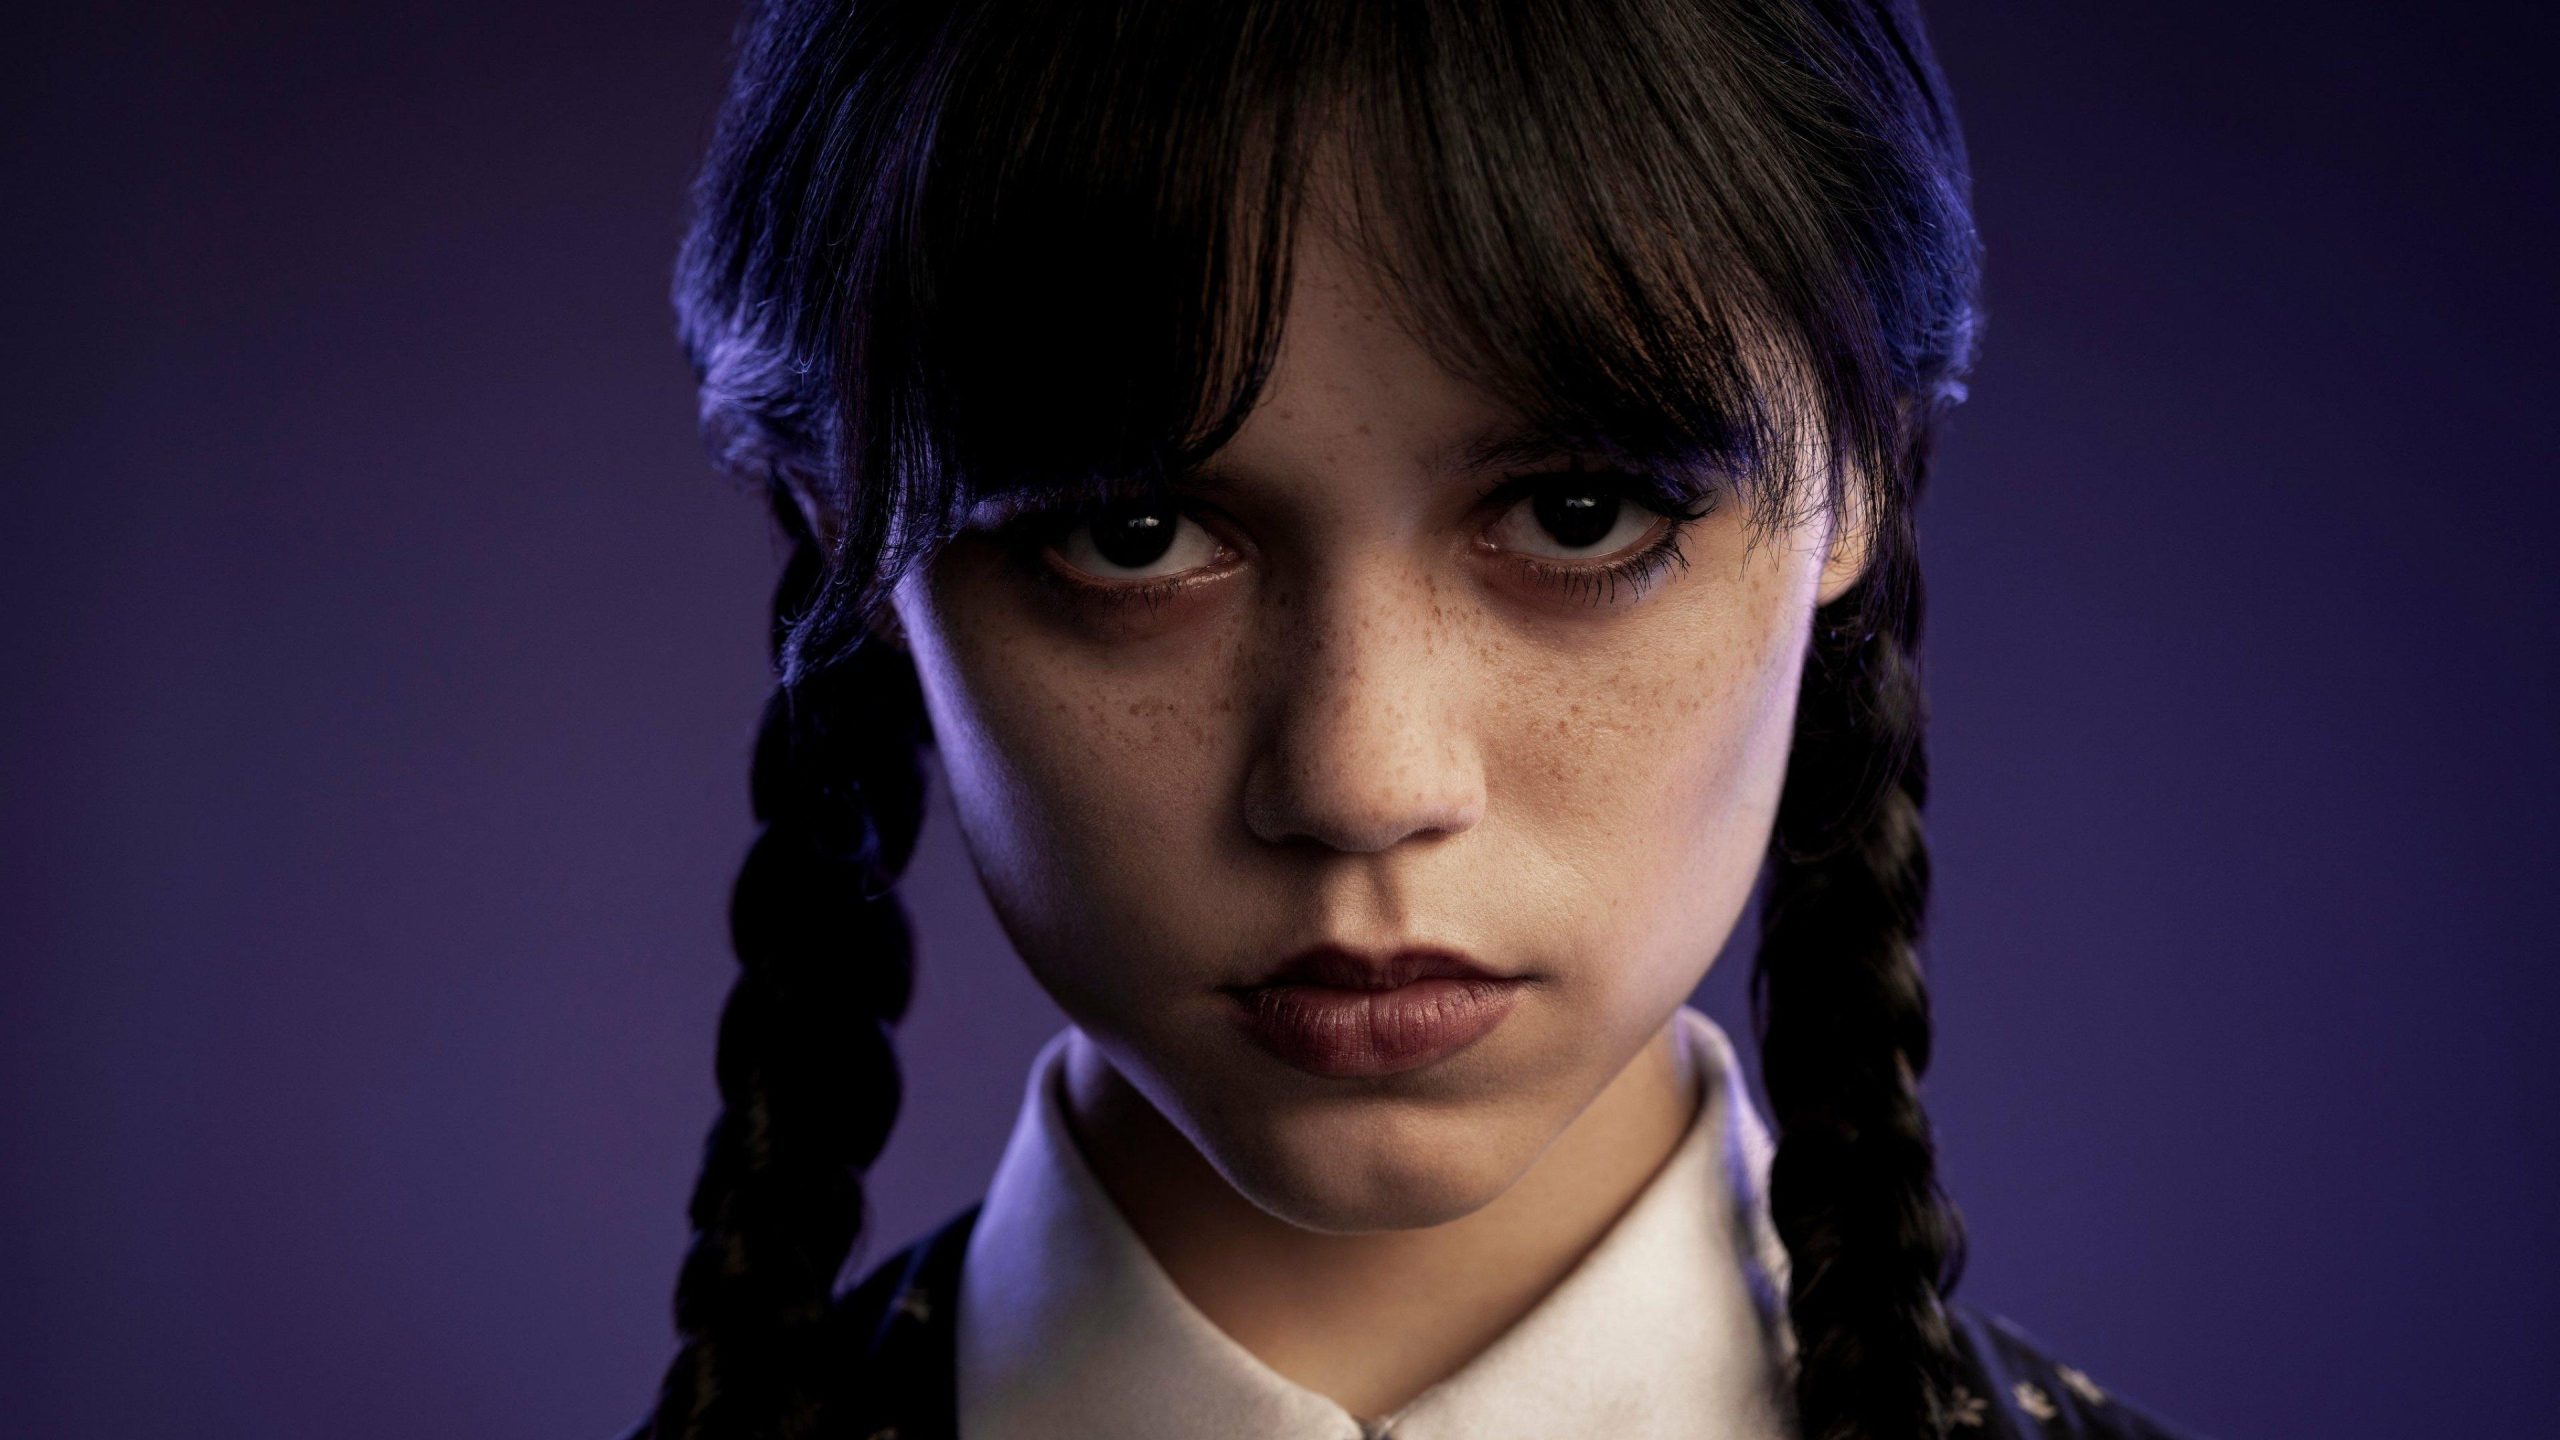 Wednesday Addams 2023 Free 4K Wallpapers